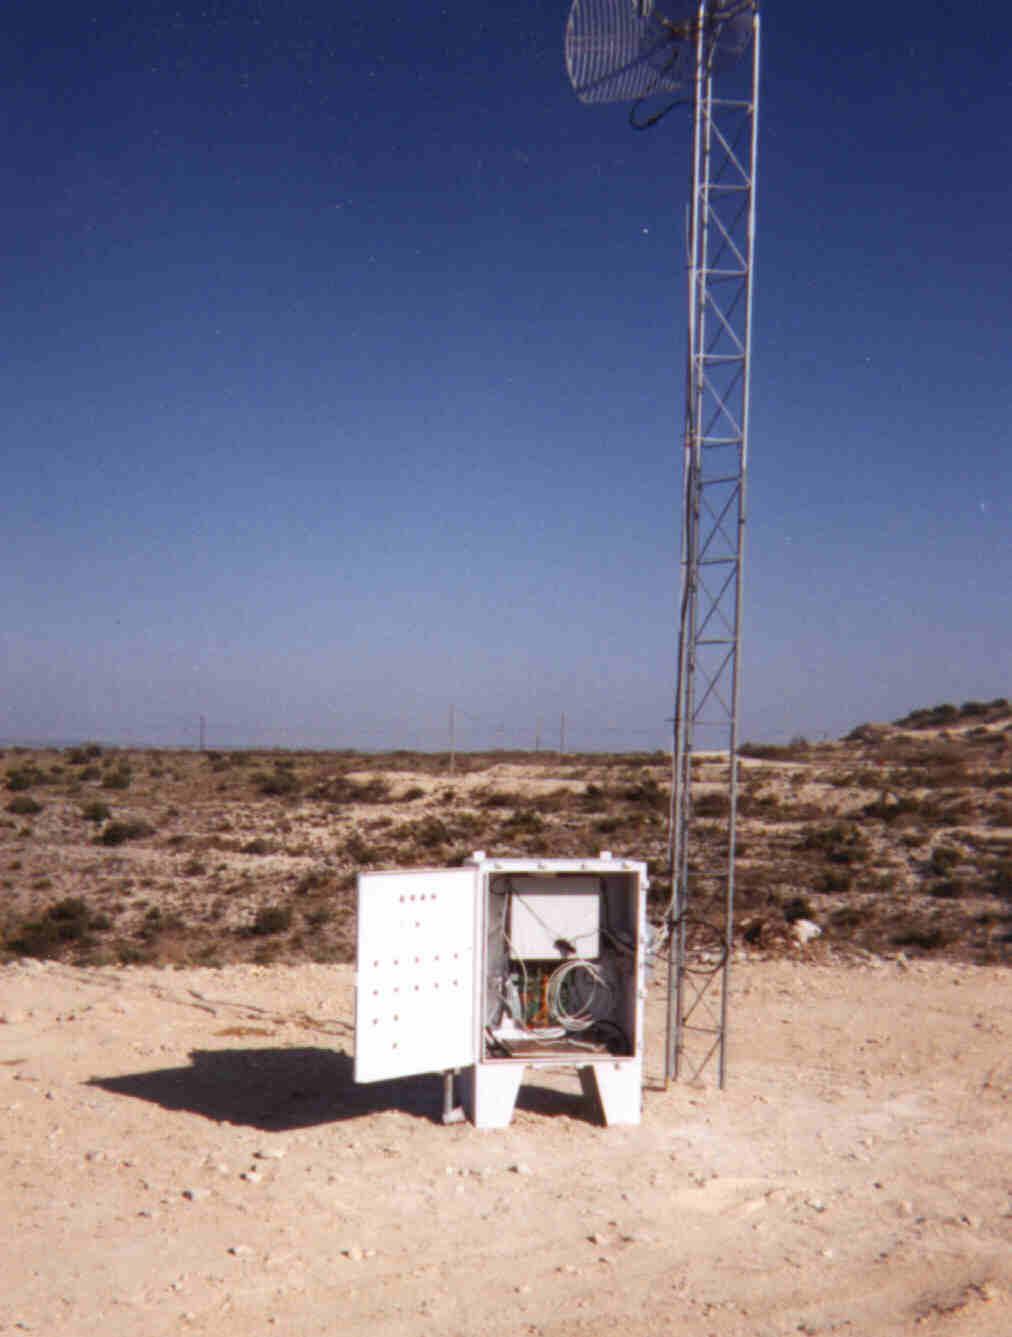 remote nodes and one base station. The remote stations are located at the collars of observation wells which are all about 1500m deep.